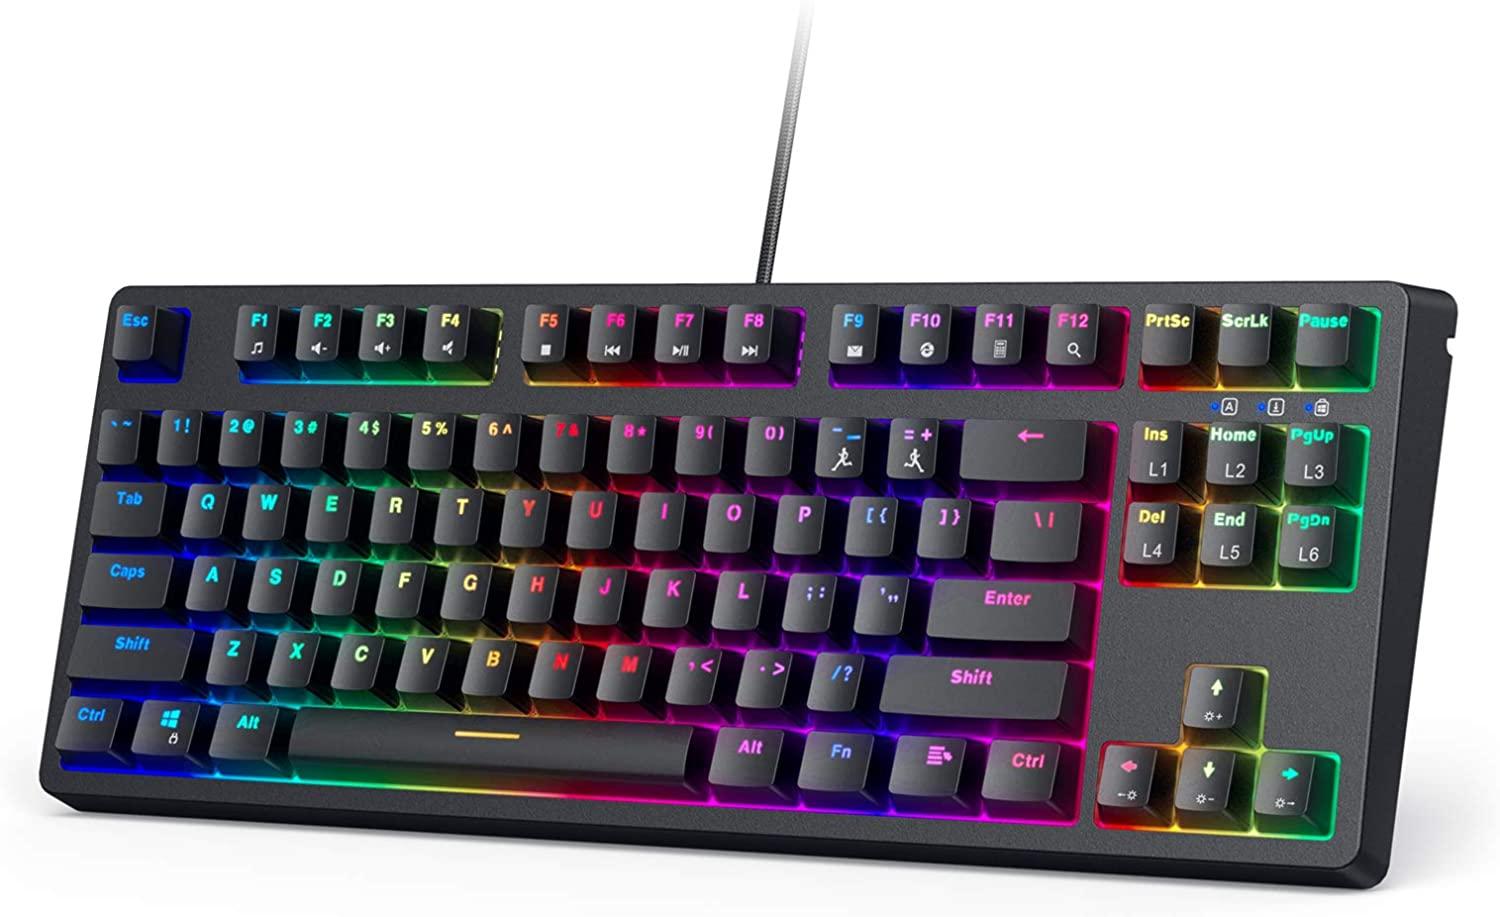 Aukey 87-Key RGB Backlit Mechanical Wired Keyboard for $24.99 Shipped